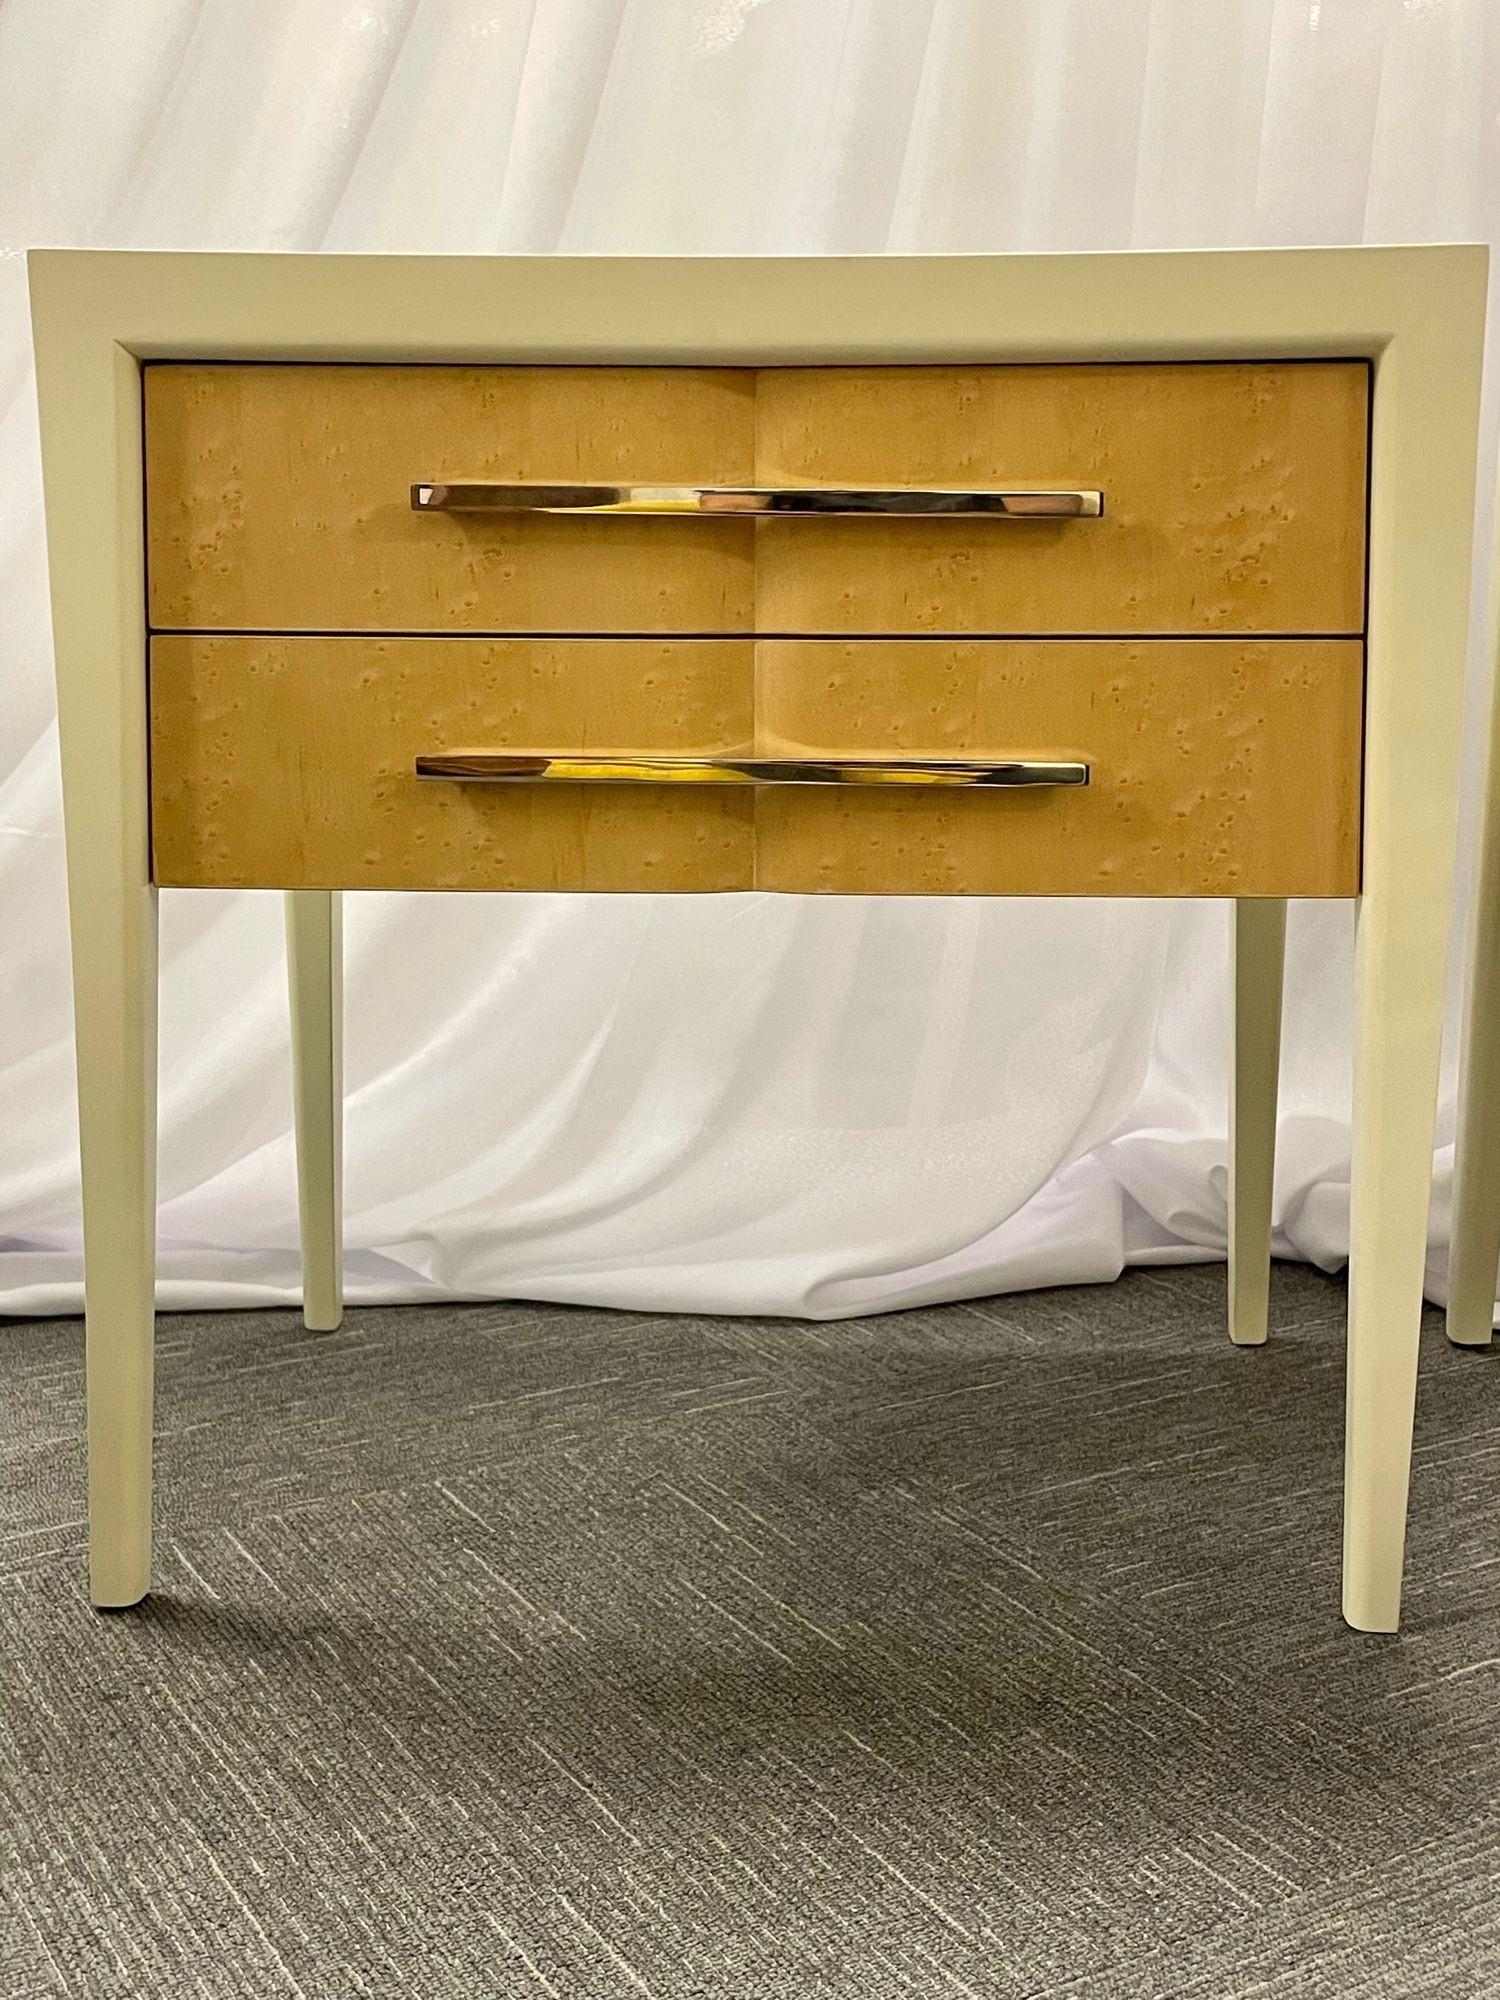 Pair of Custom end table, night stands, chest, Mitchell Gold and Bob Williams
 
A pair of night or bedside tables having long sleek legs and two drawers with long metal pulls. The interior bears Mitchell Gold and Bob Williams seal.